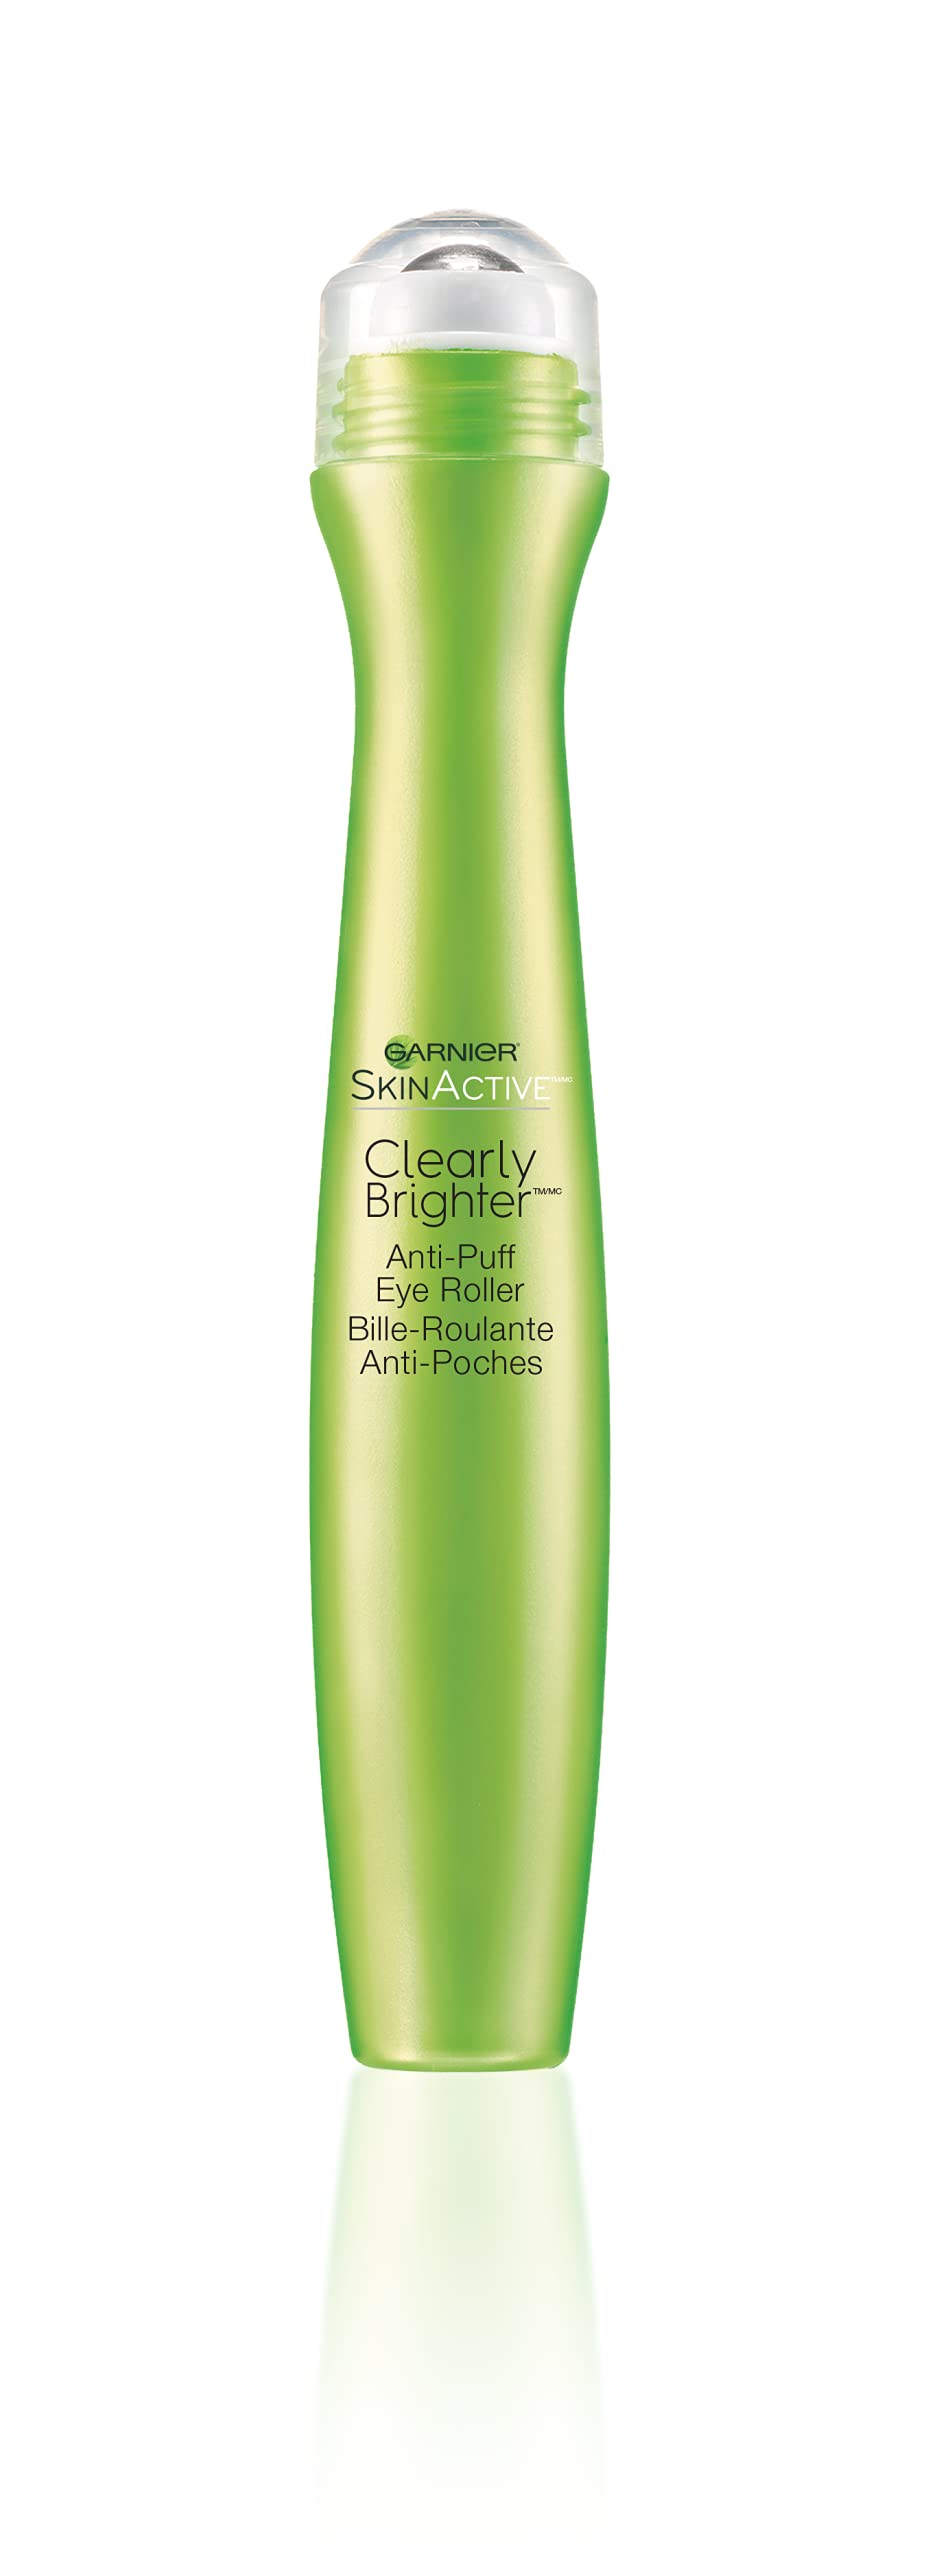 Garnier SkinActive Clearly Brighter Anti-Puff Eye Roller, 0.5 Fl Oz (15mL), 1 Count (Packaging May Vary)